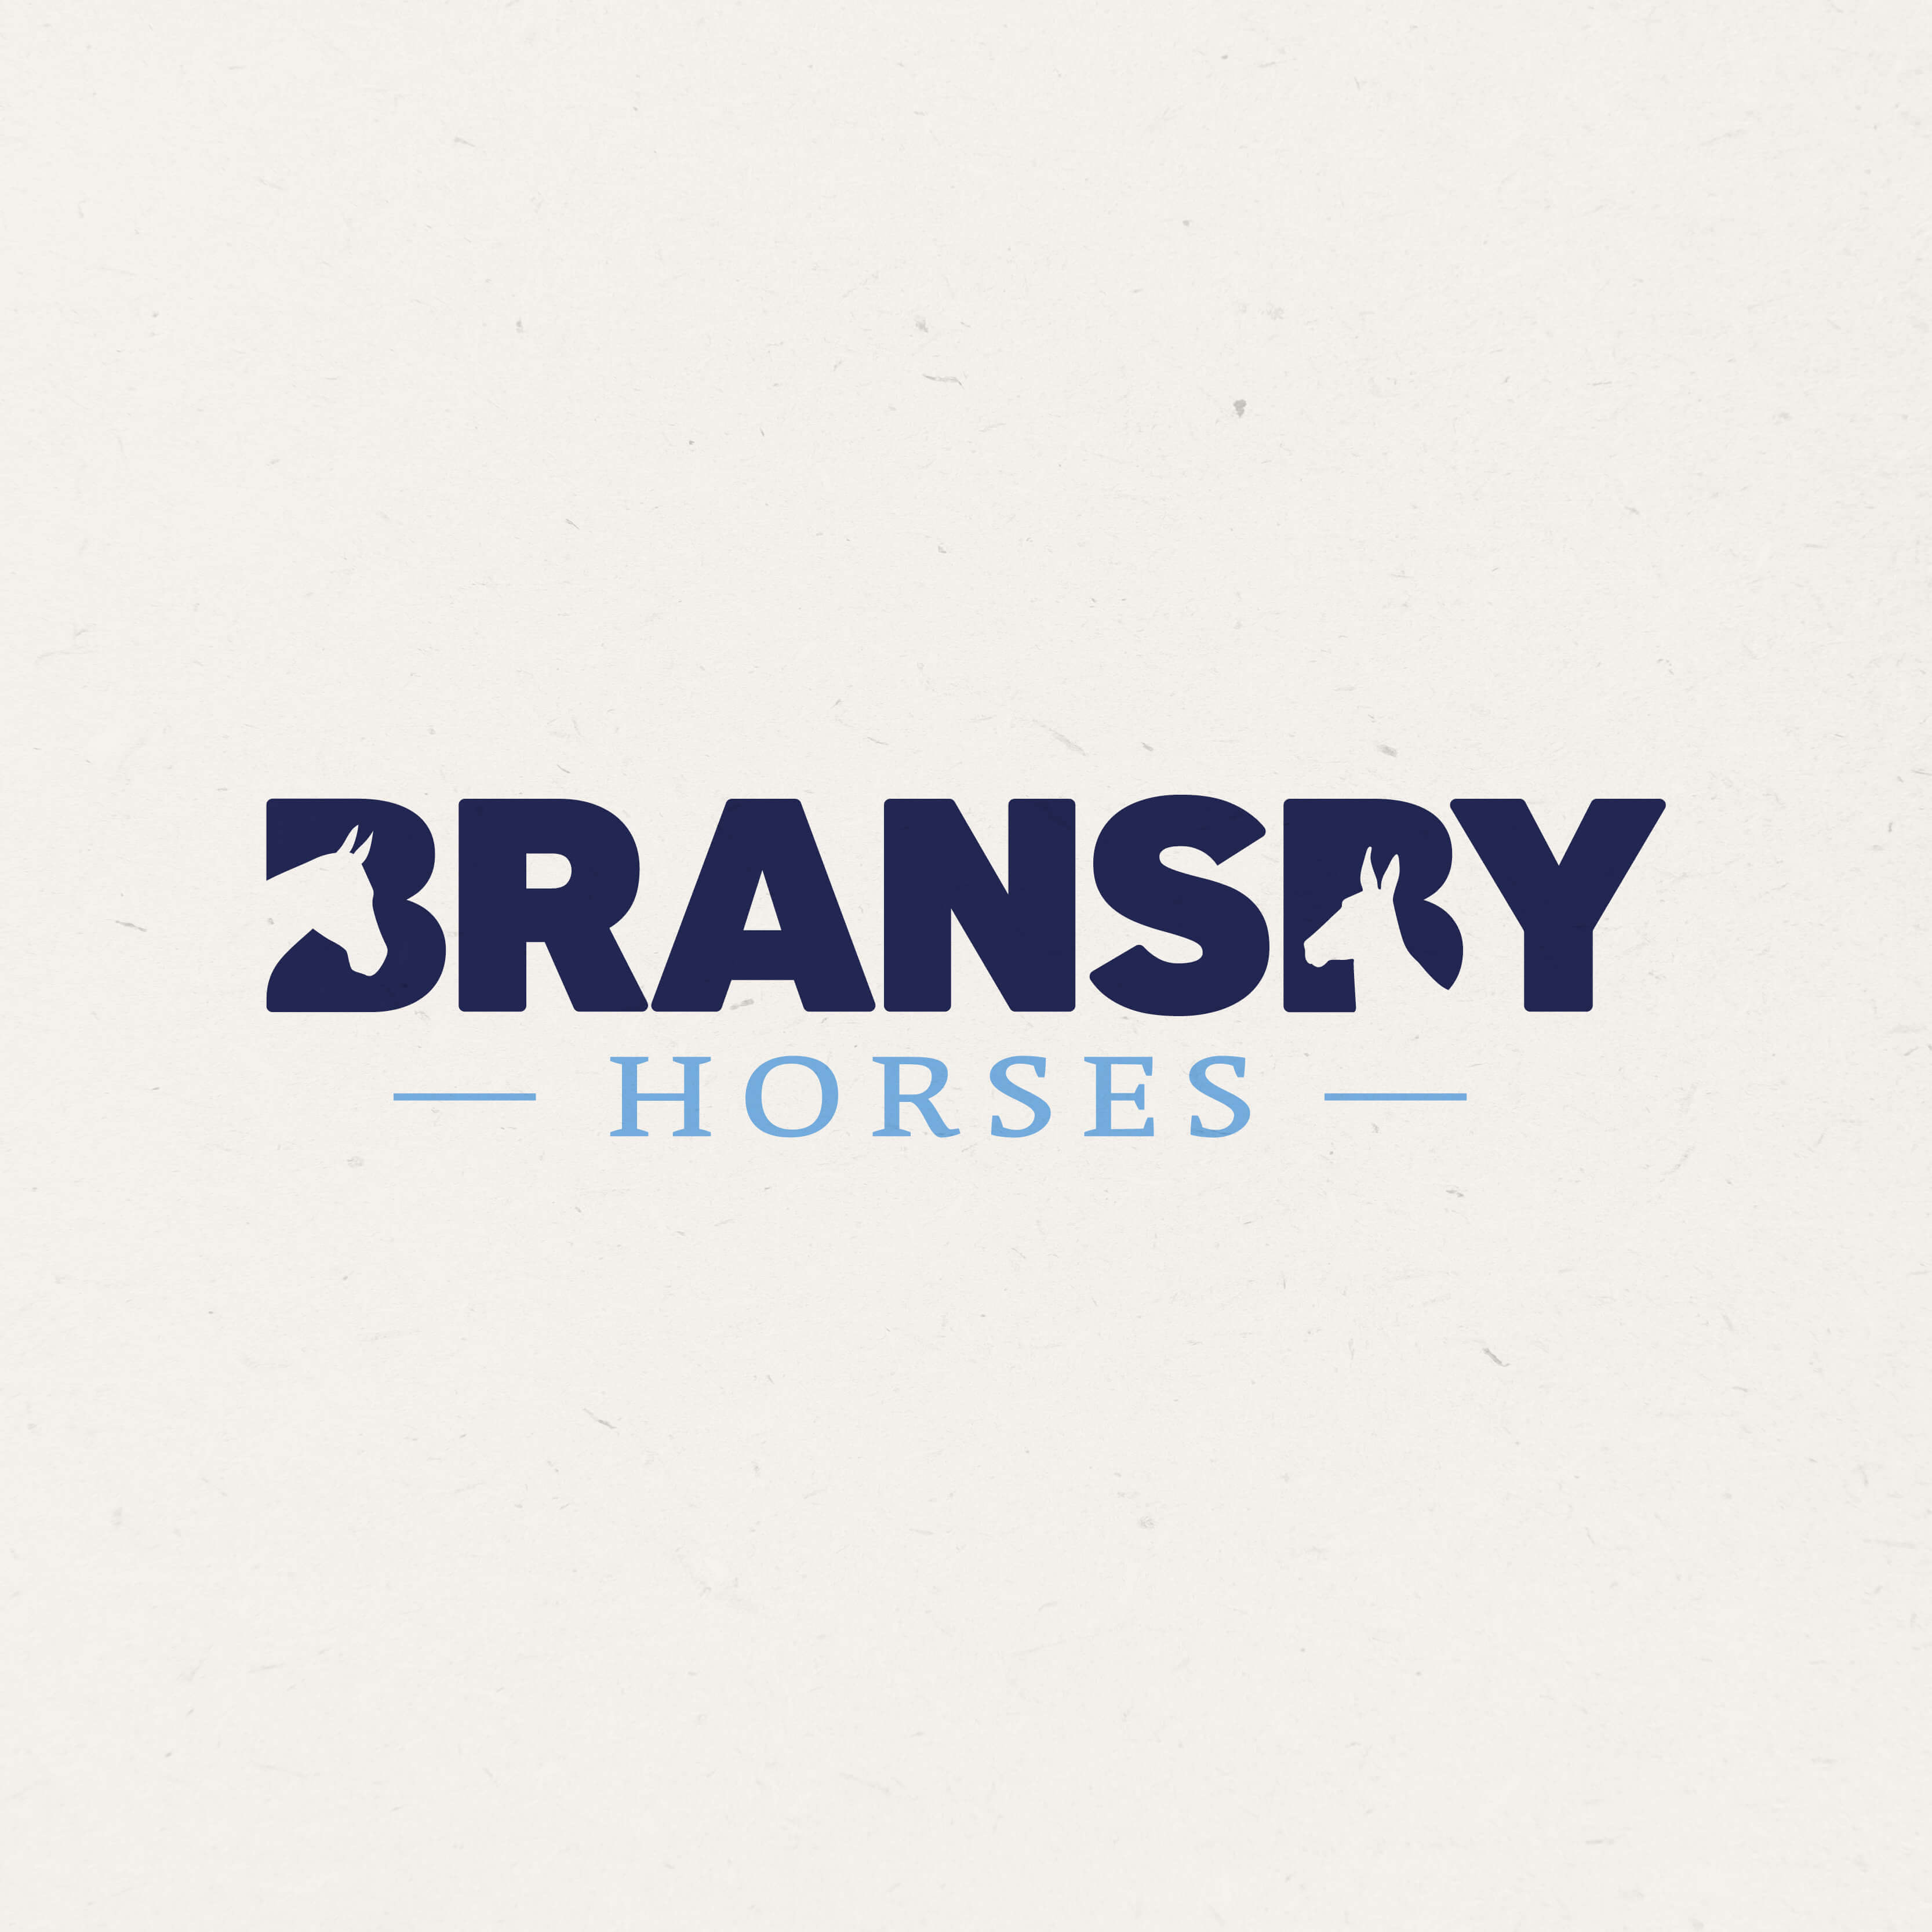 Bransby case study